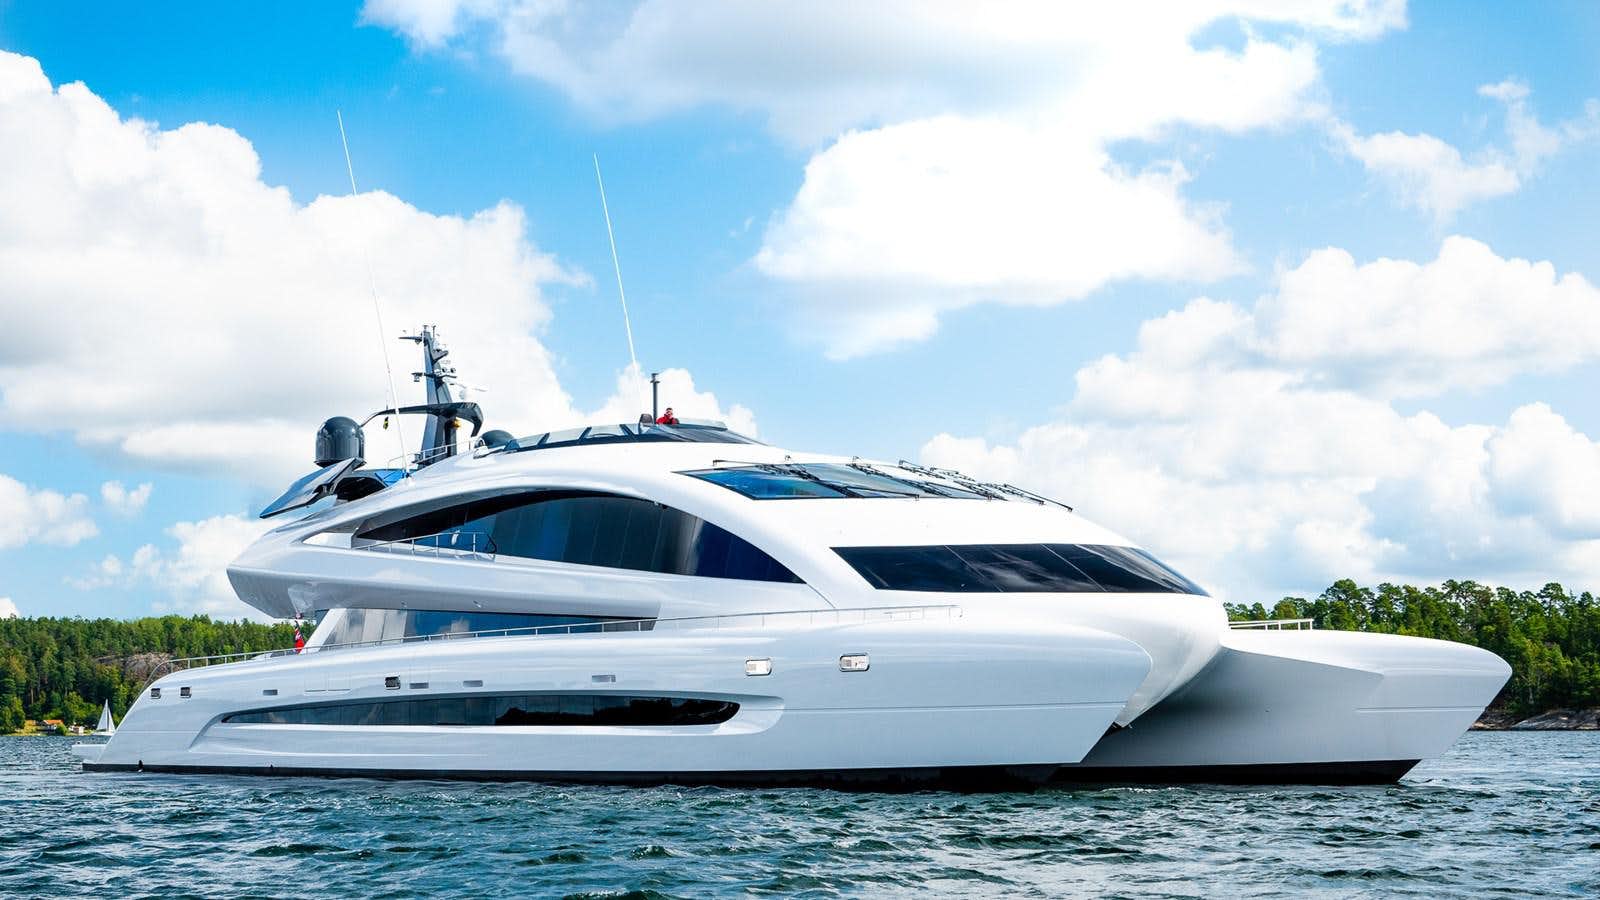 Watch Video for ROYAL FALCON ONE Yacht for Sale